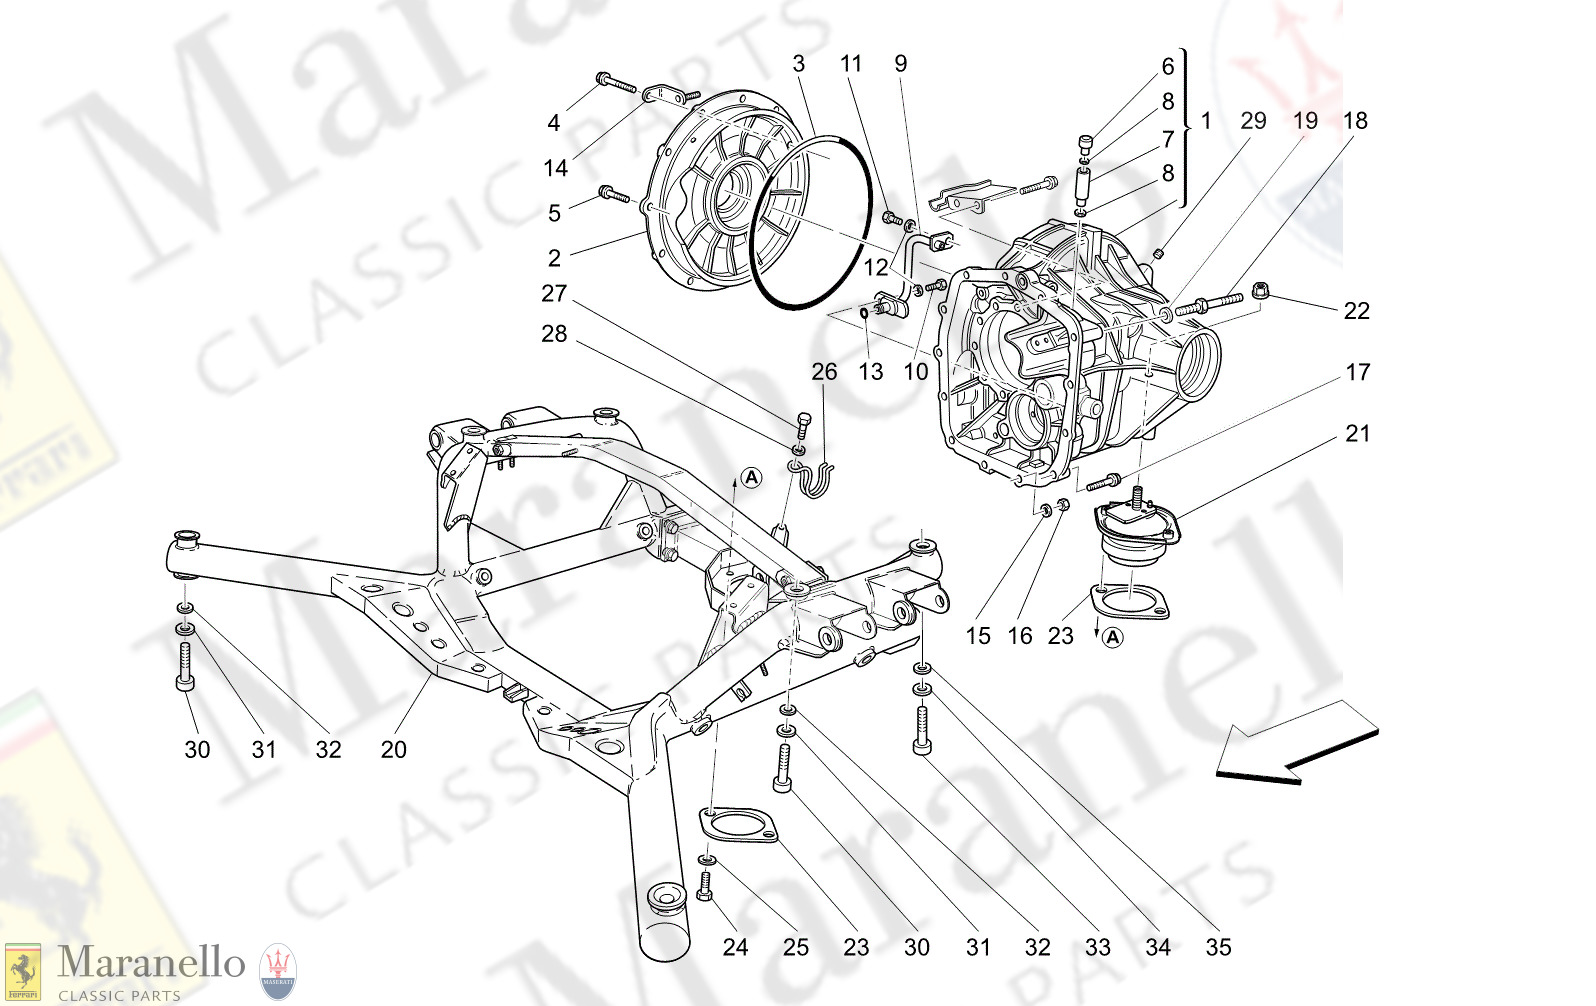 M3.22 - 11 - M322 - 11 Differential Box And Rear Underbody